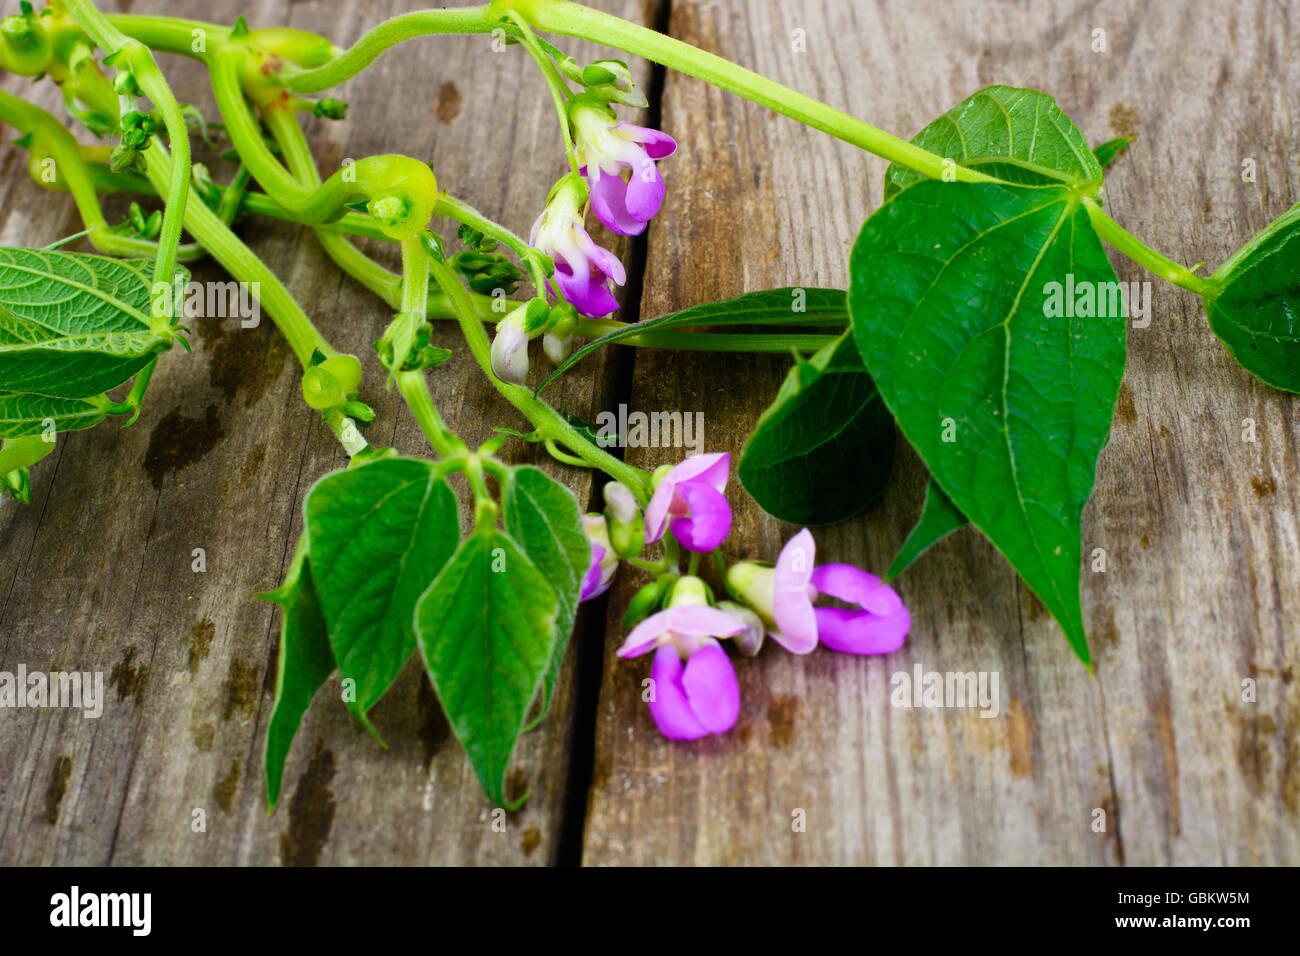 Asparagus Beans, Leaves and Flowers Stock Photo